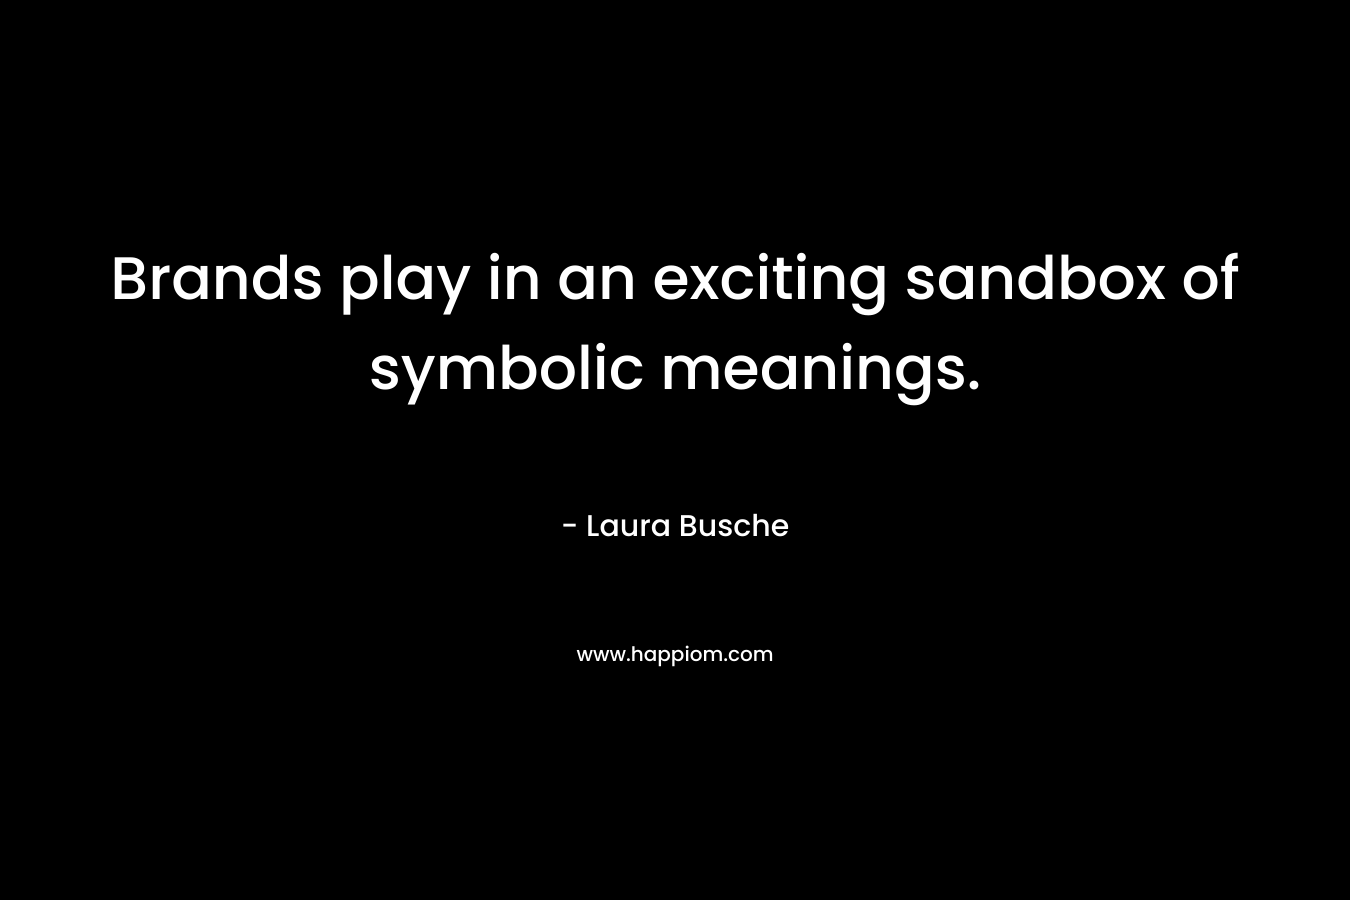 Brands play in an exciting sandbox of symbolic meanings. – Laura Busche